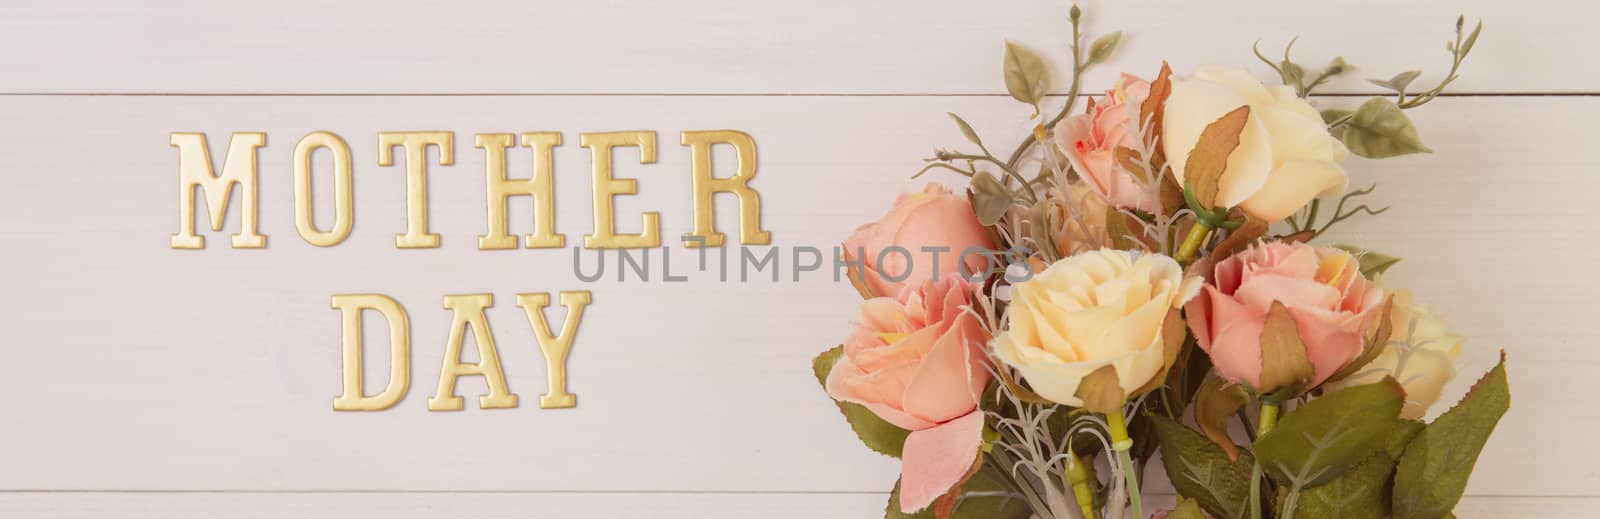 Beautiful flower and text mother day on wooden background with r by nnudoo